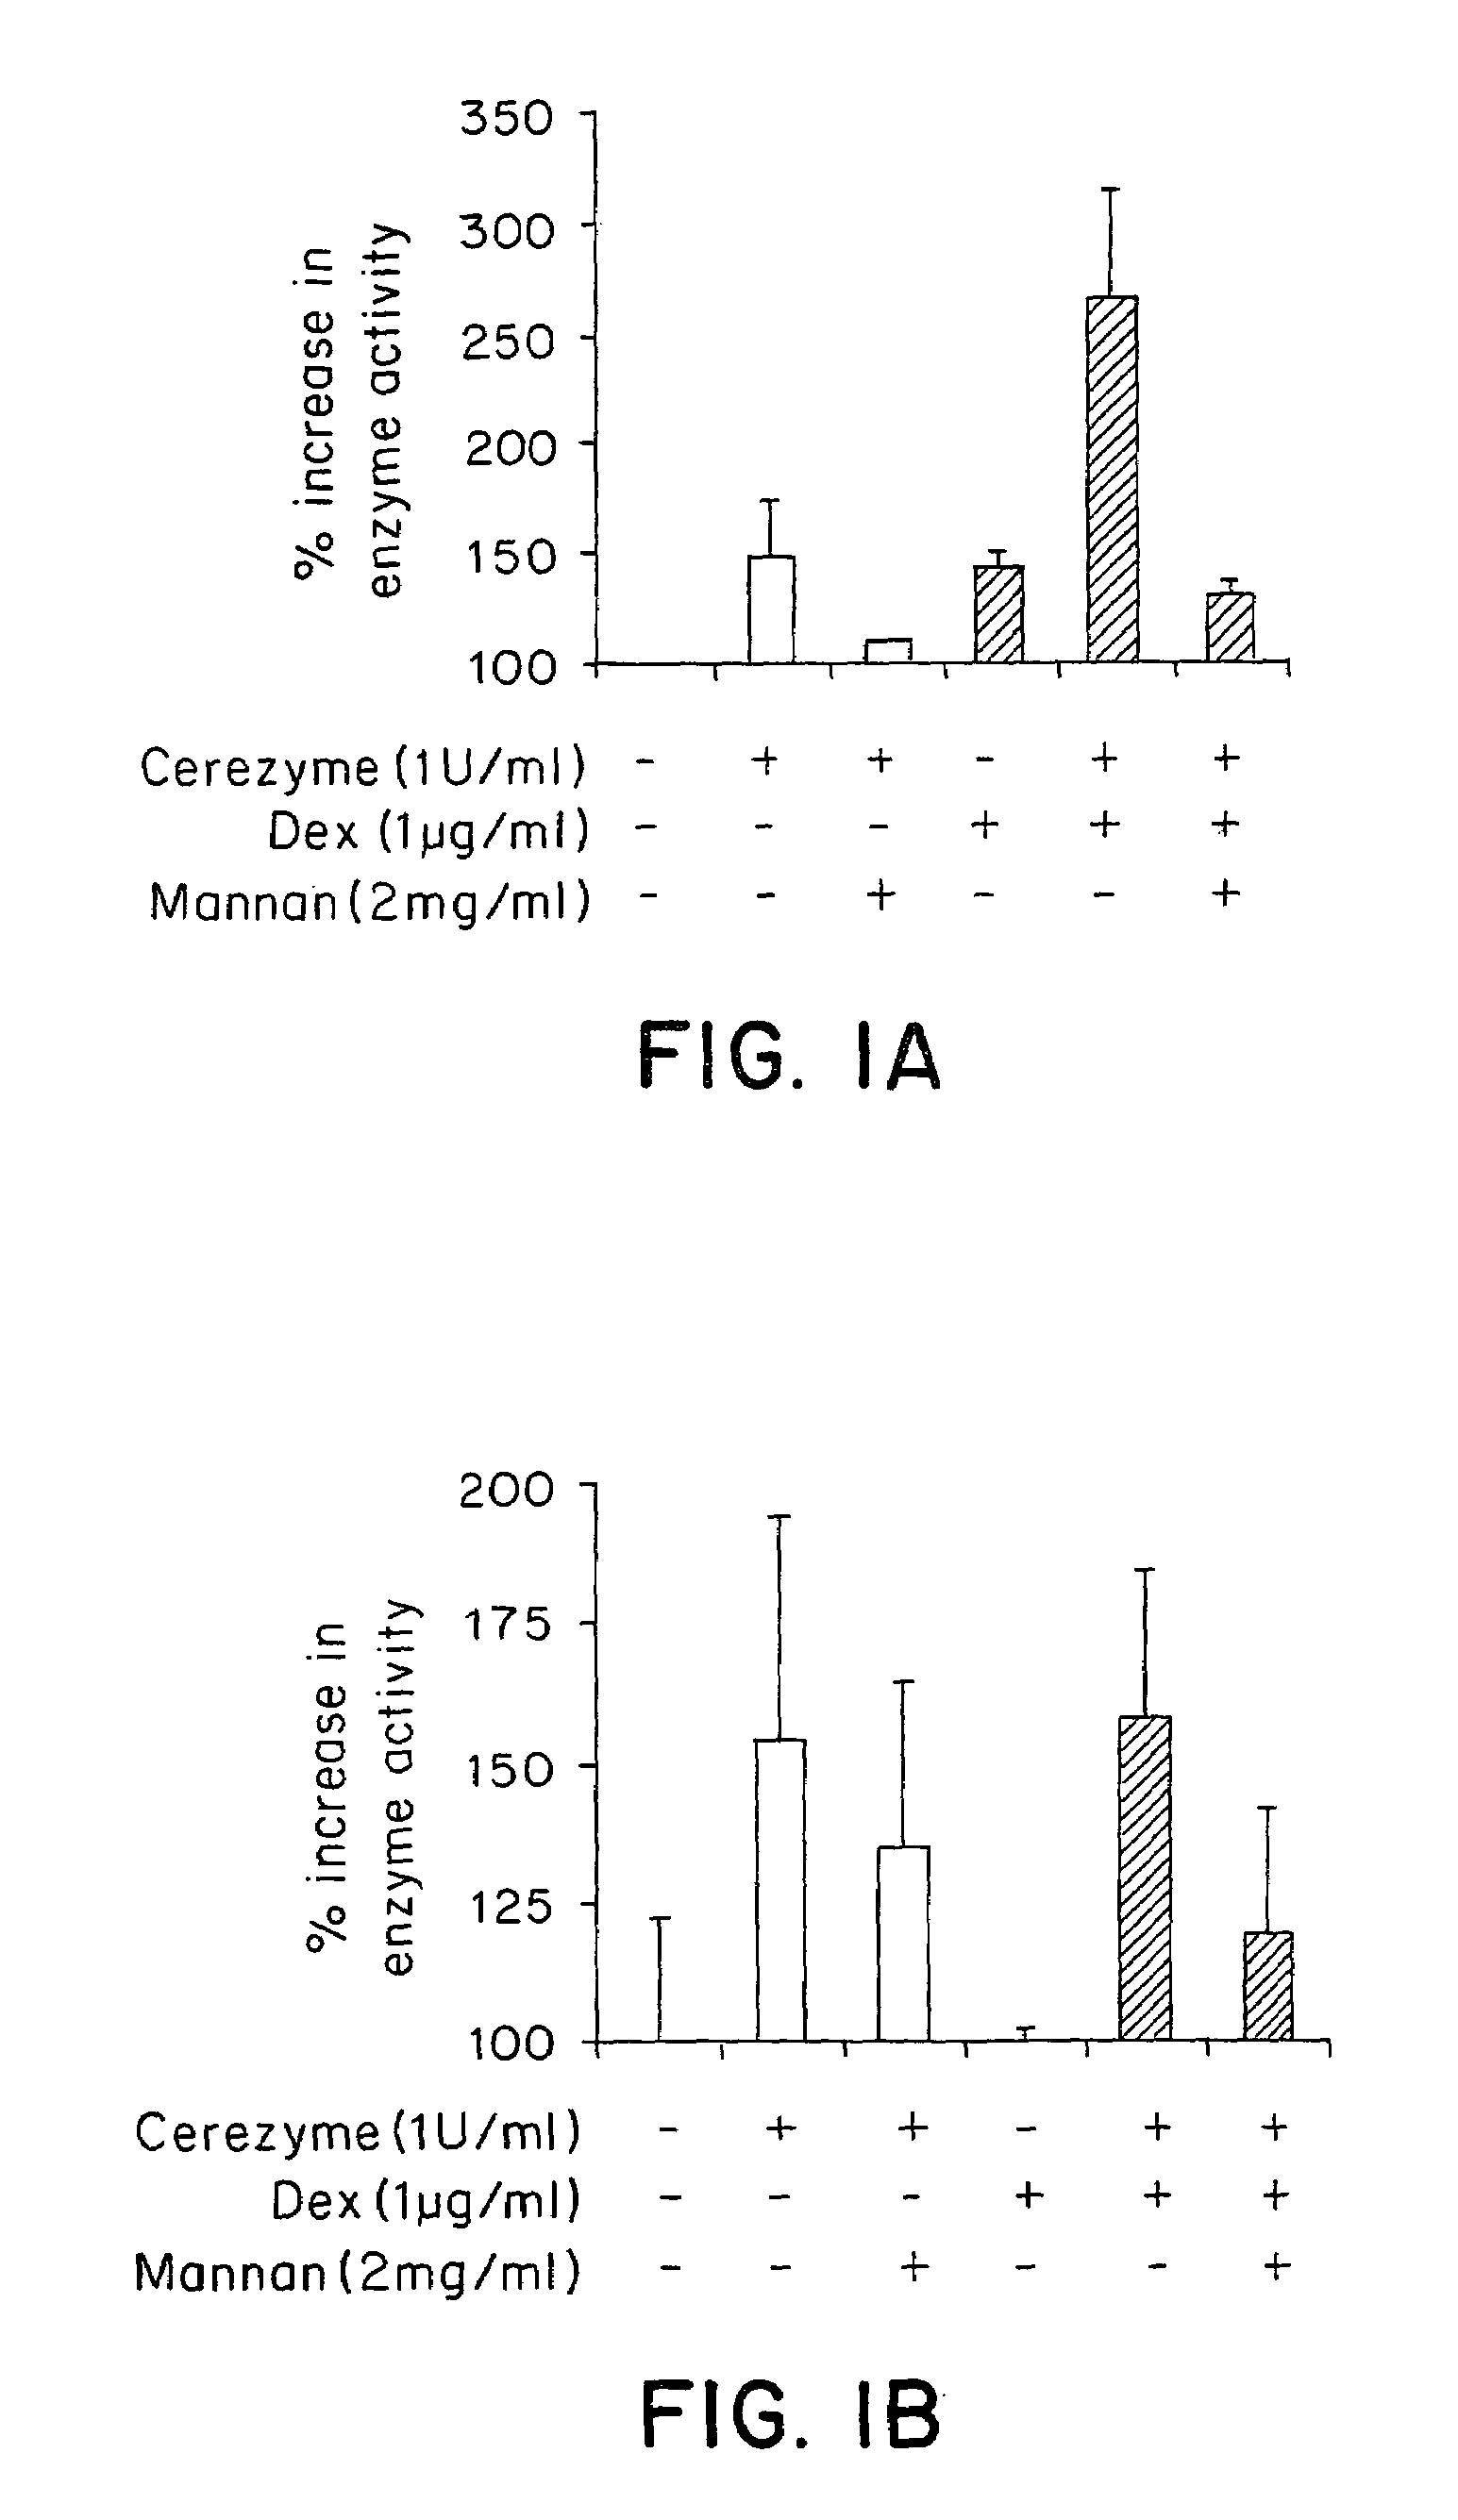 Methods of enhancing lysosomal storage disease therapy by modulation of cell surface receptor density